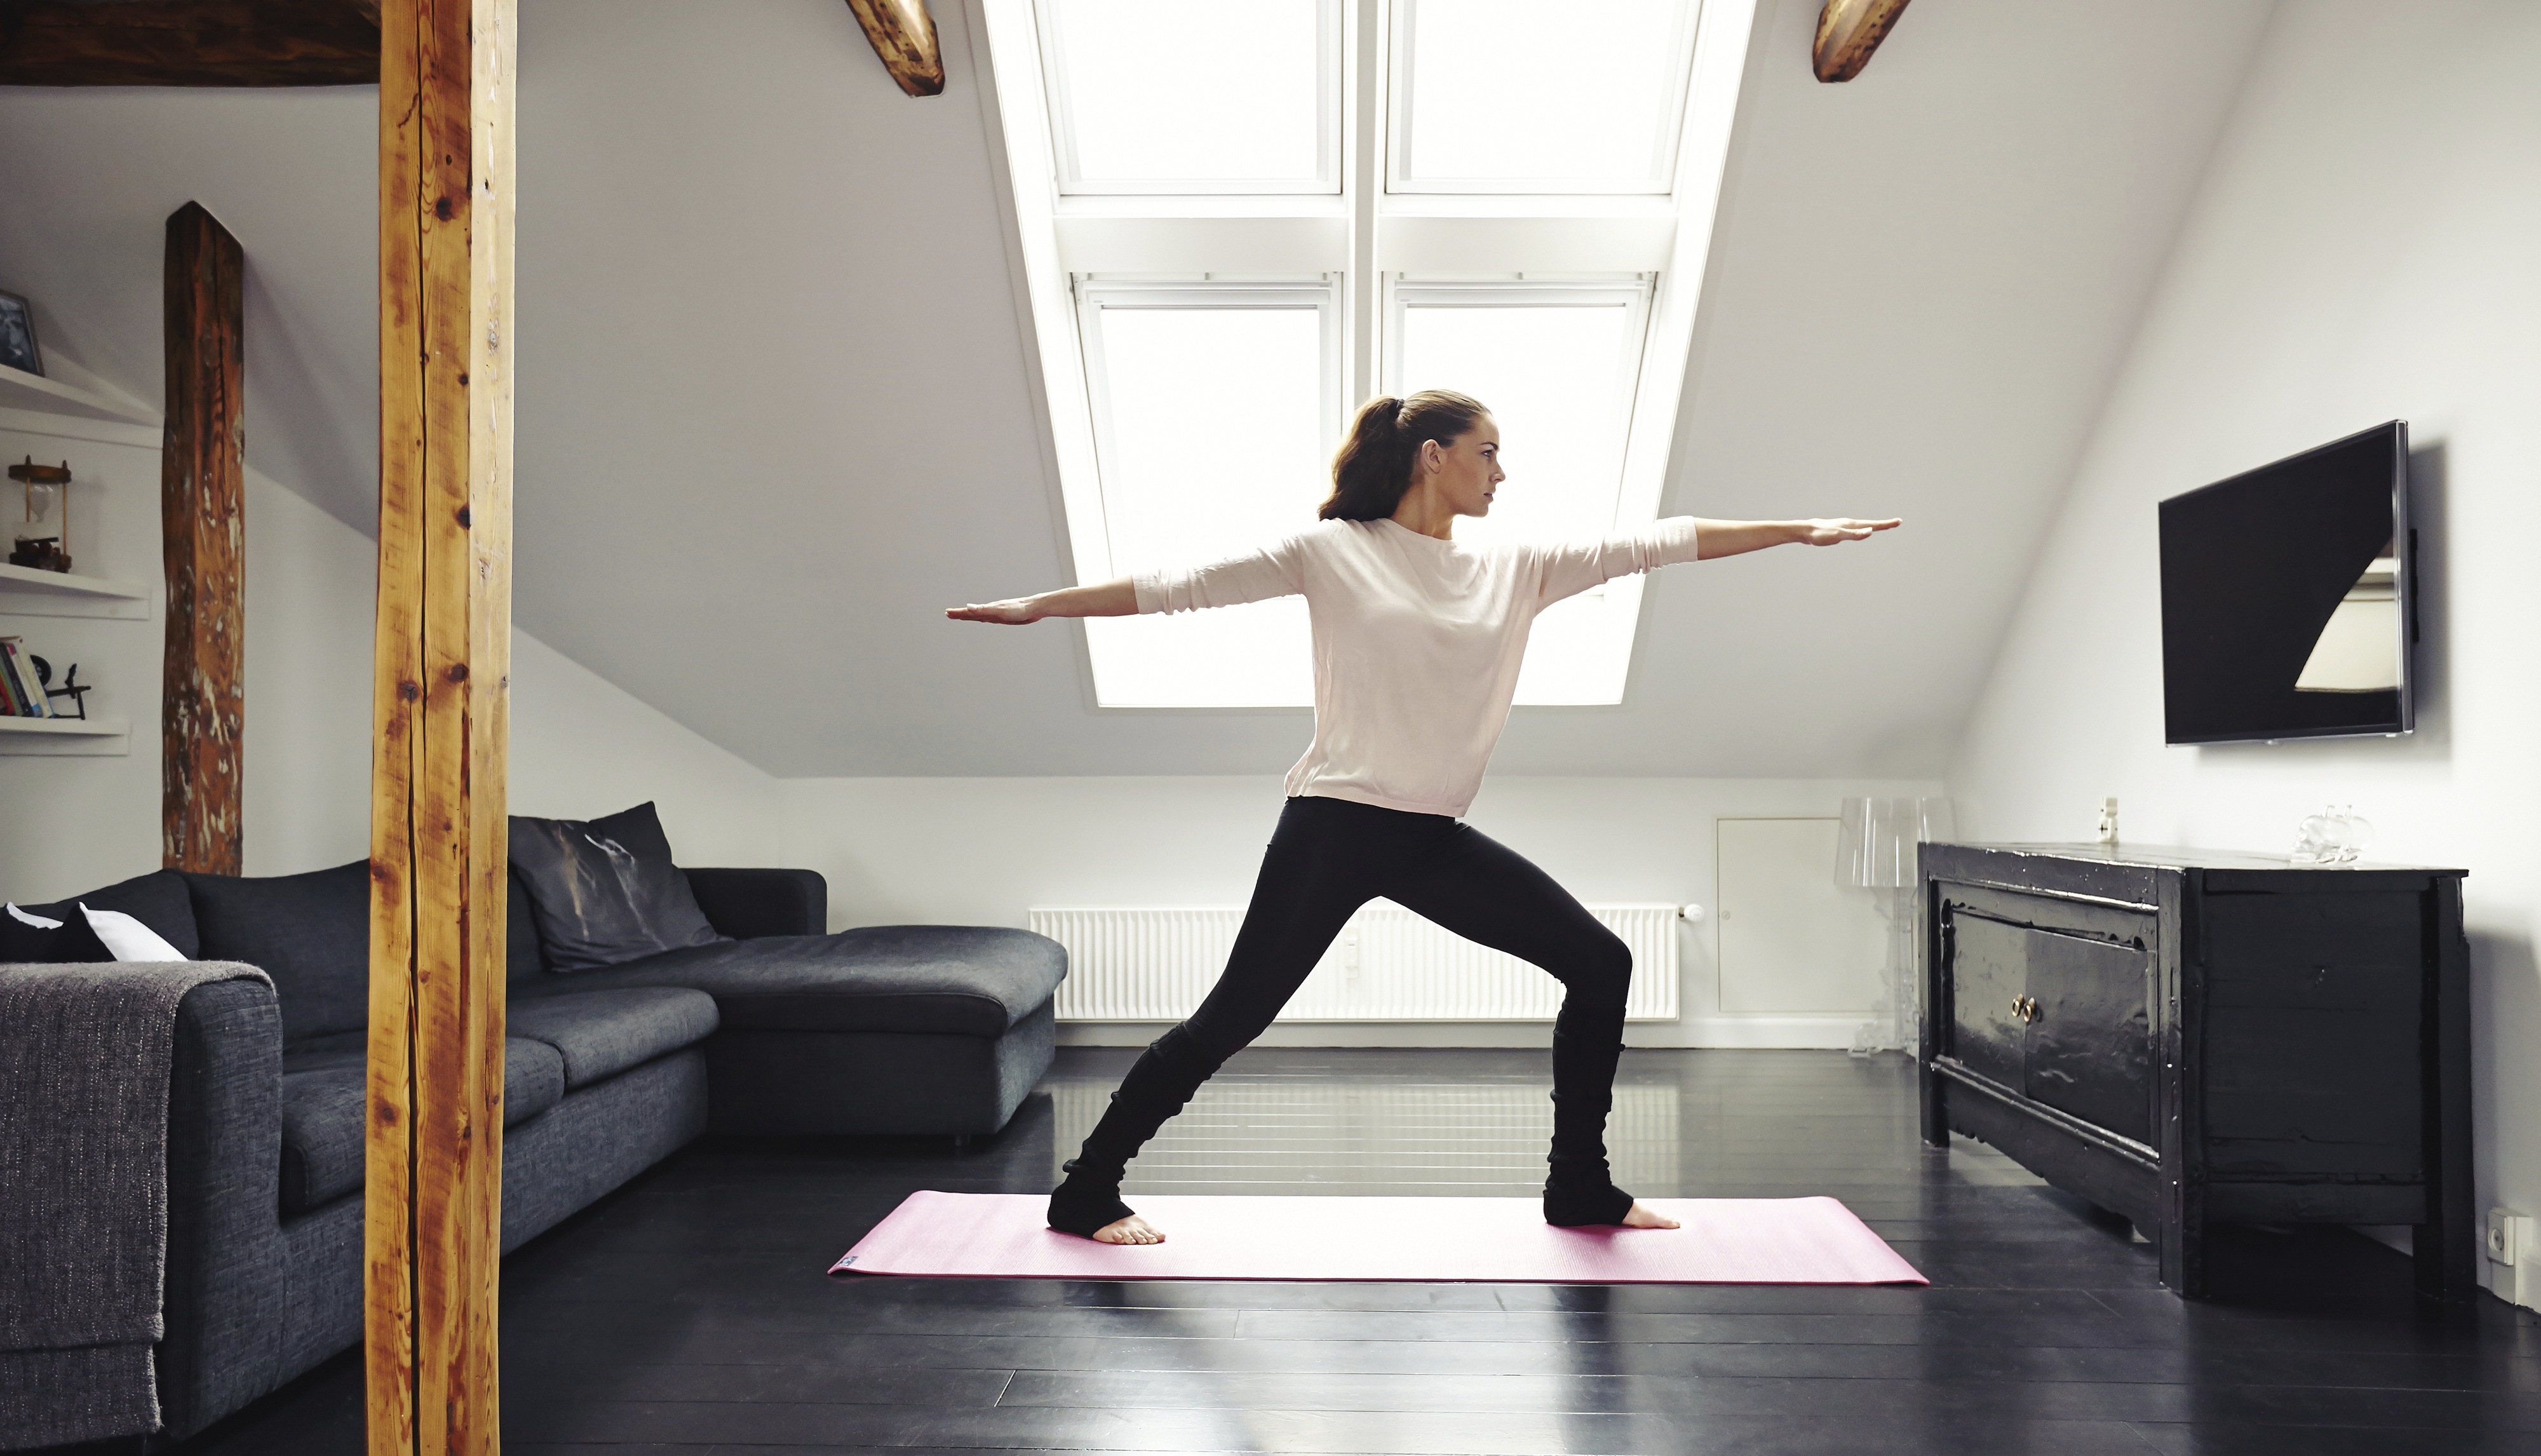 Yoga in your living room? D.C.'s on-demand app offers in-home lifestyle services | WTOP4000 x 2292